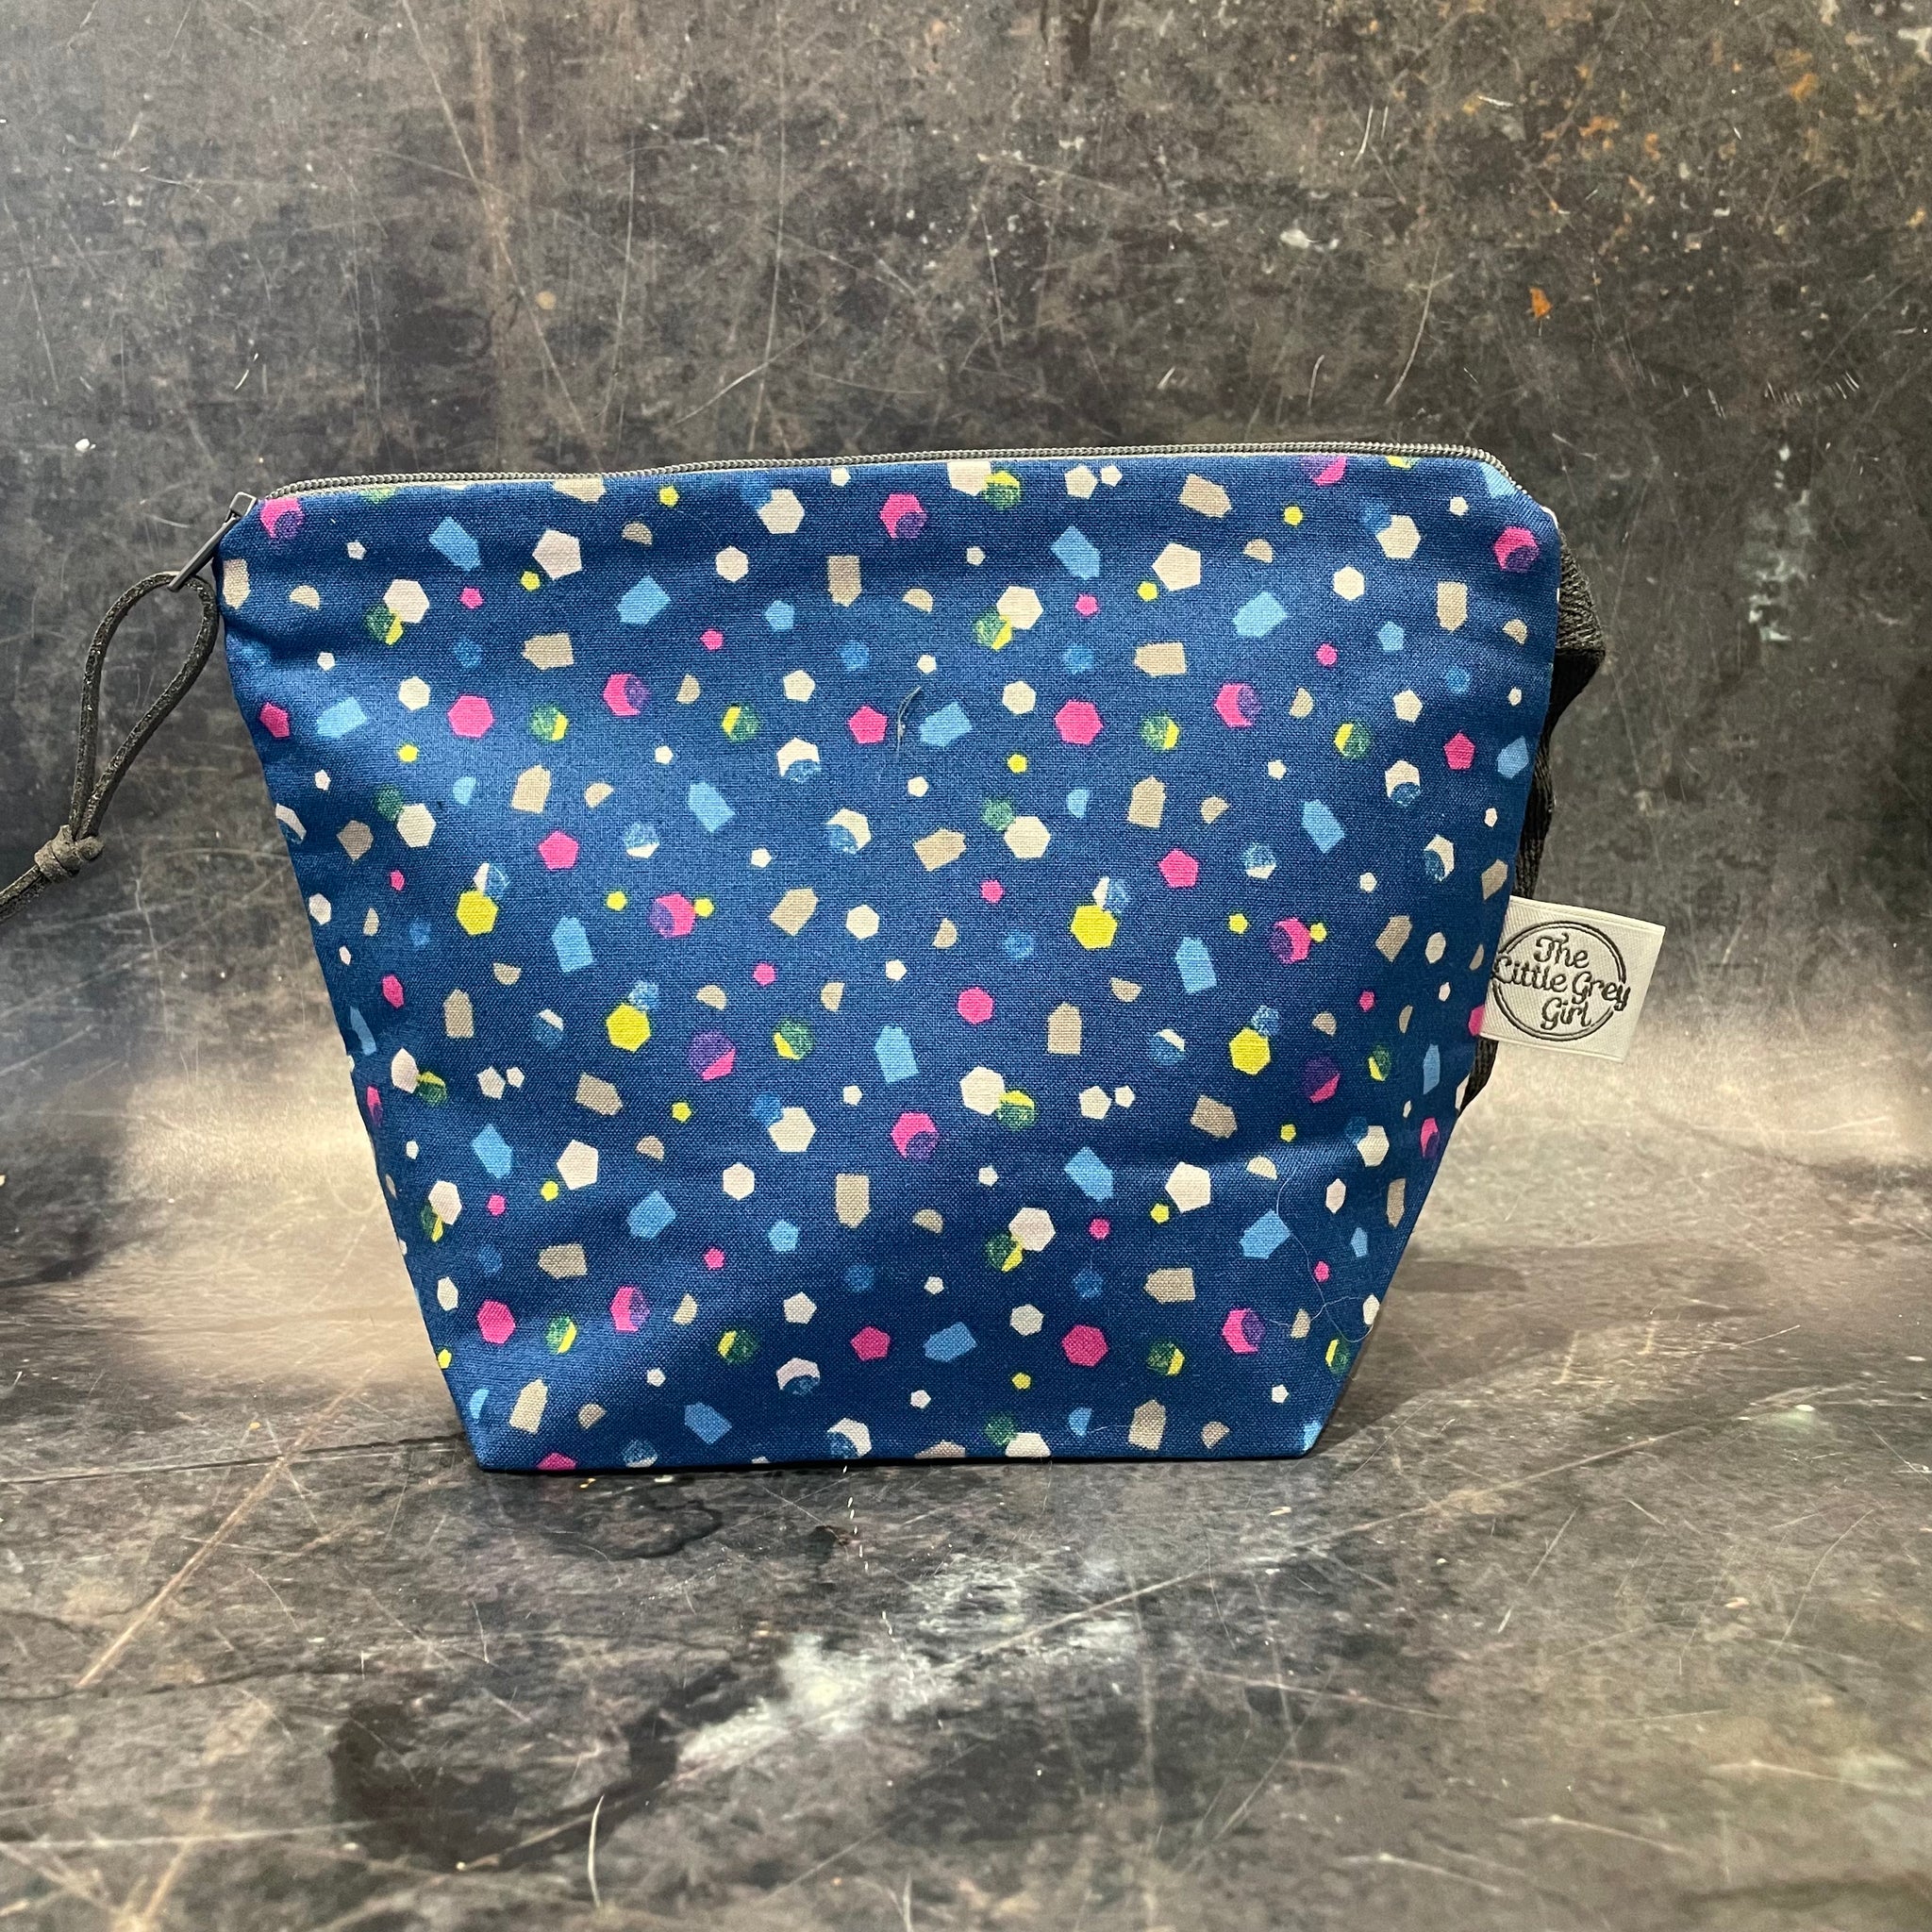 Small Project Bags - Discontinued Size